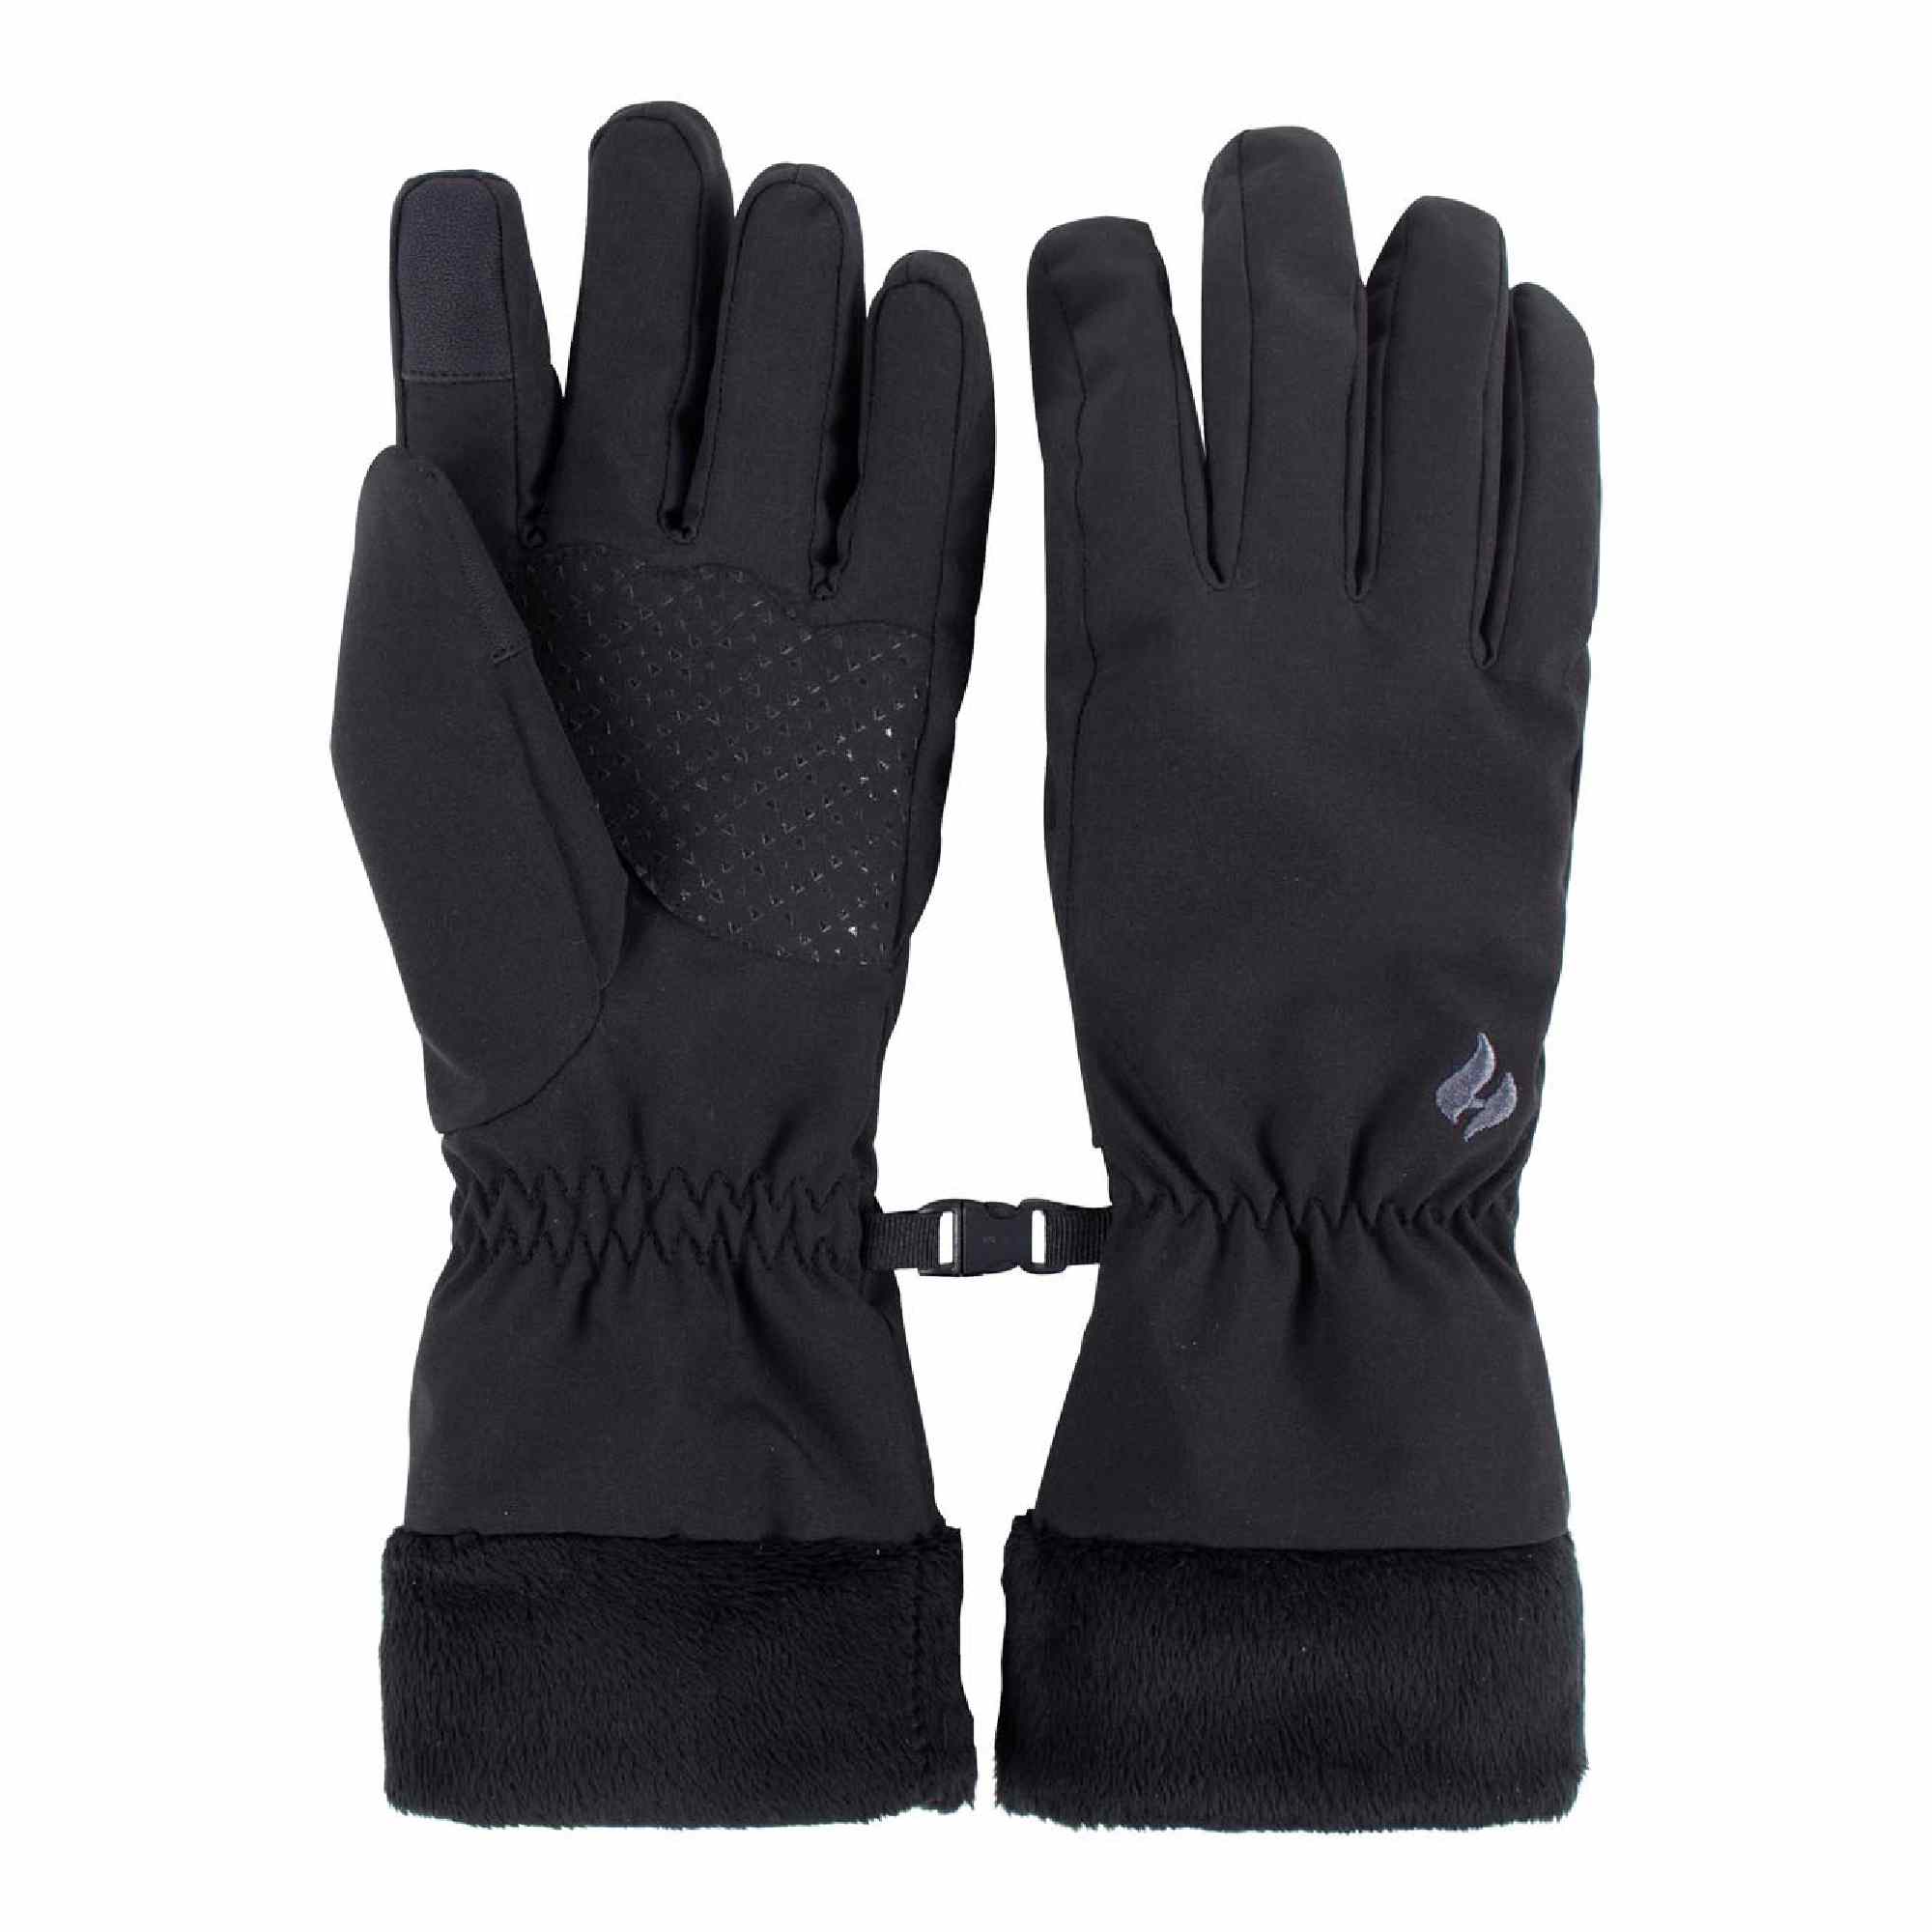 Ladies Soft Shell Gloves | Winter Gloves by Heat Holders